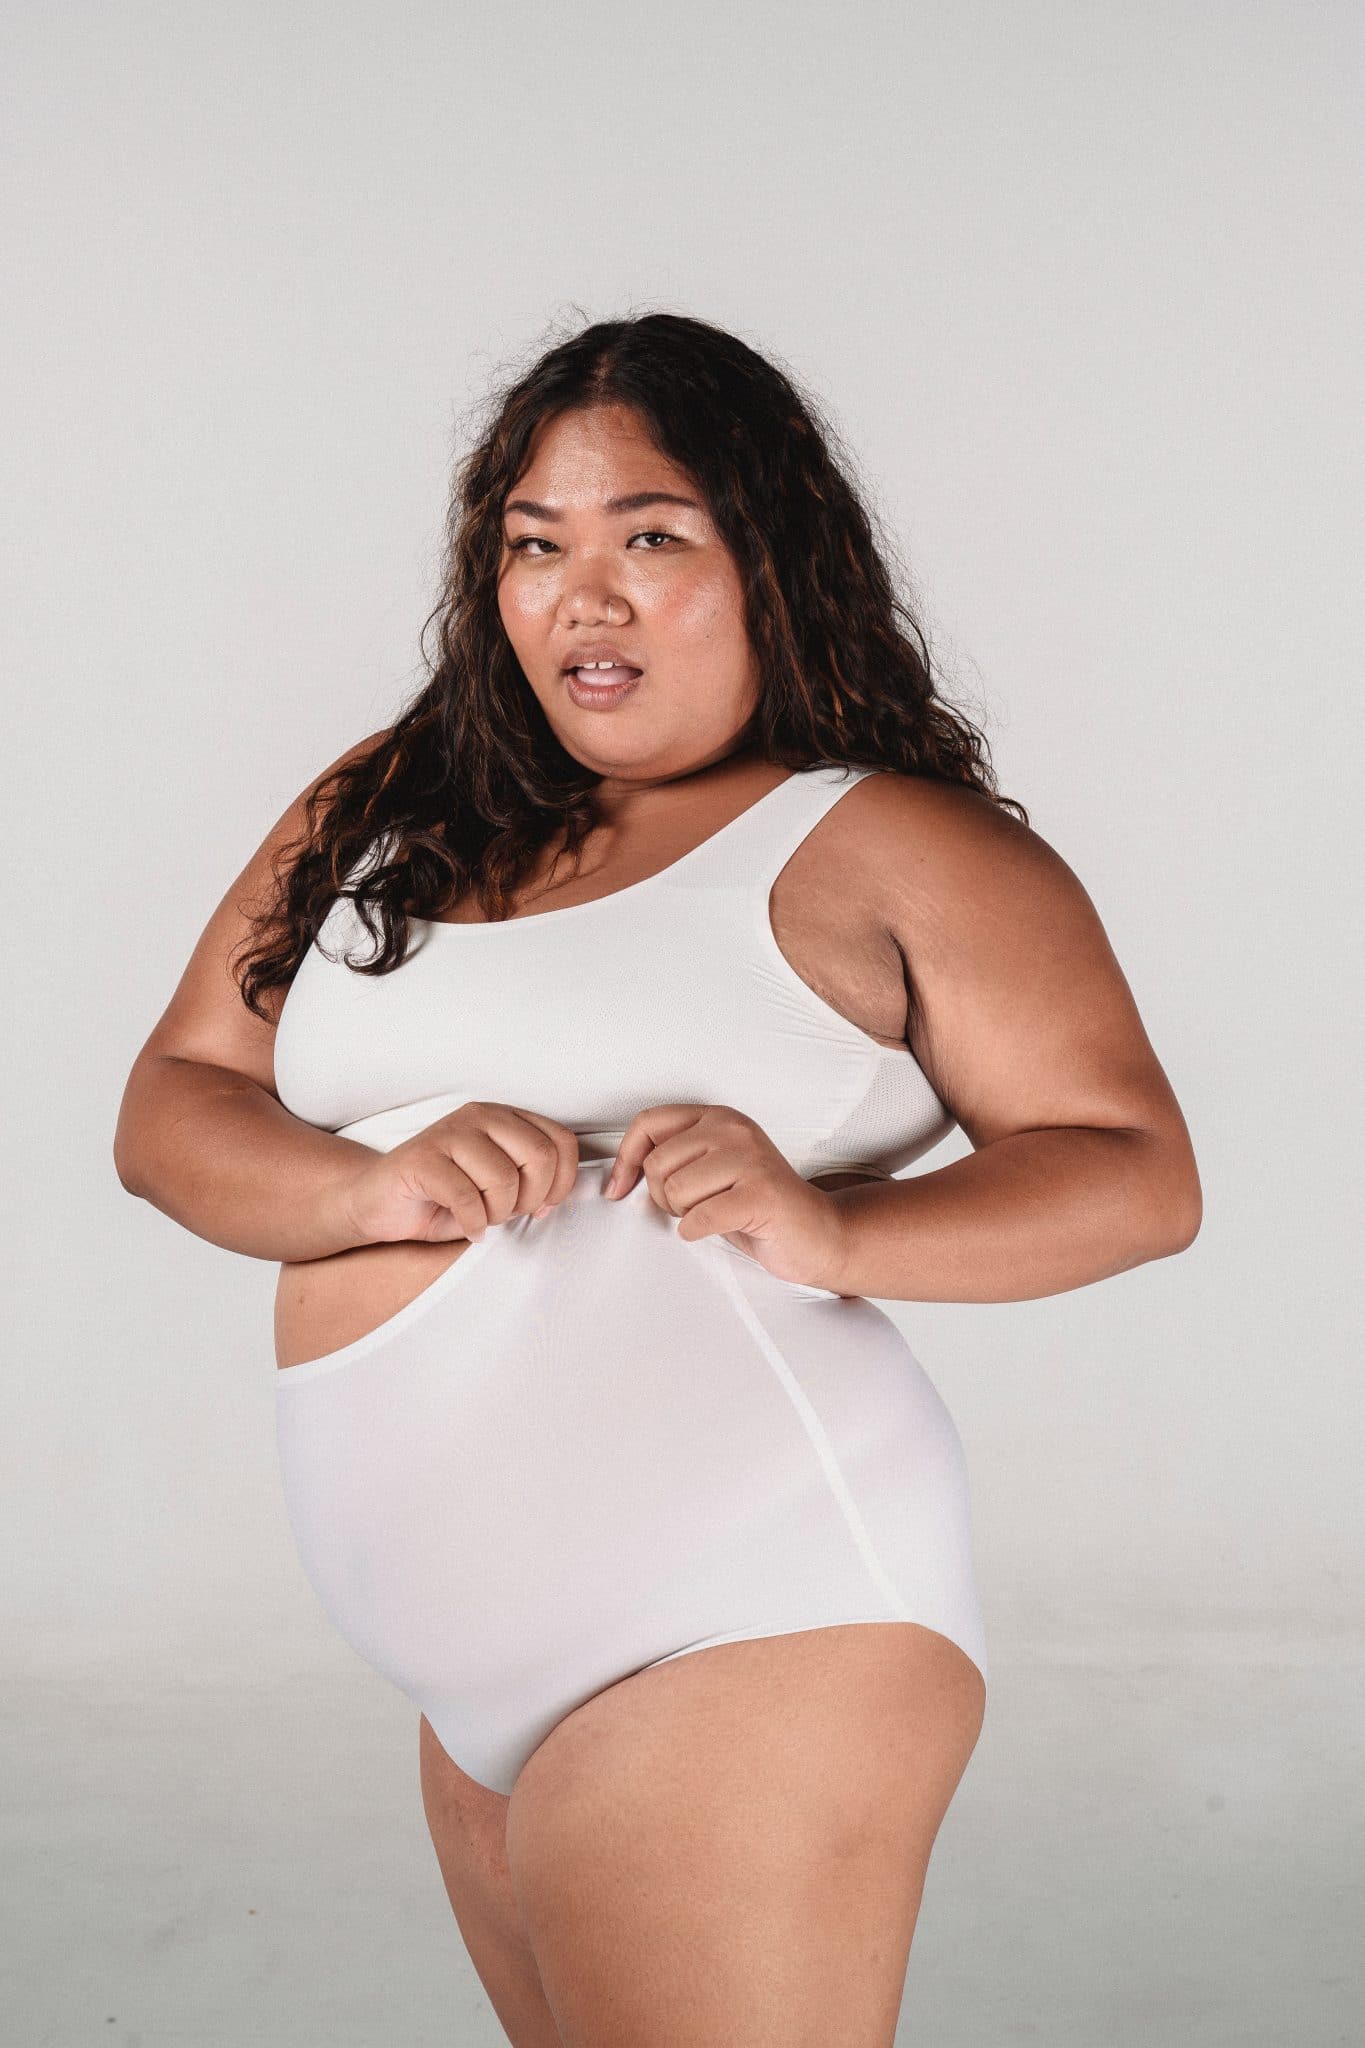 How to choose the right size shapewear